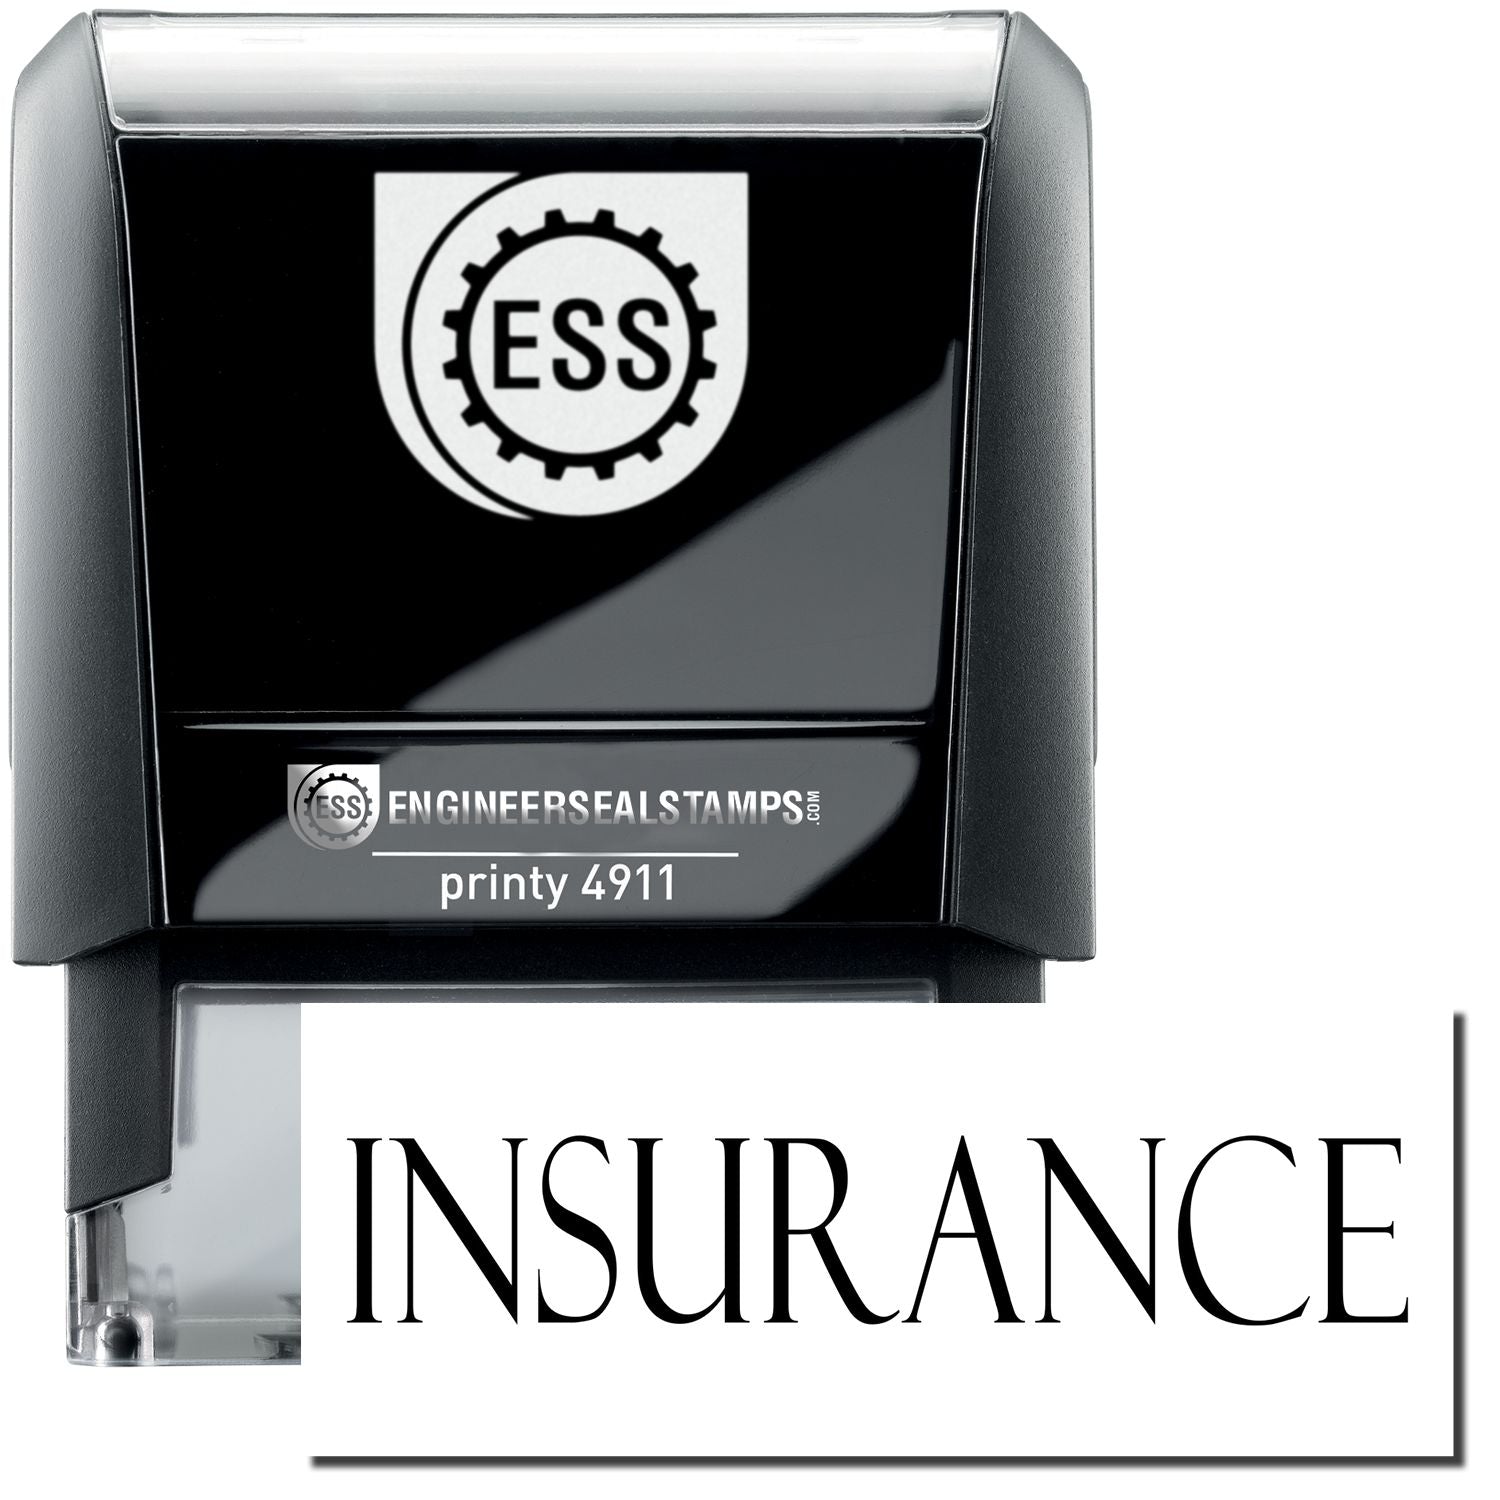 A self-inking stamp with a stamped image showing how the text "INSURANCE" is displayed after stamping.